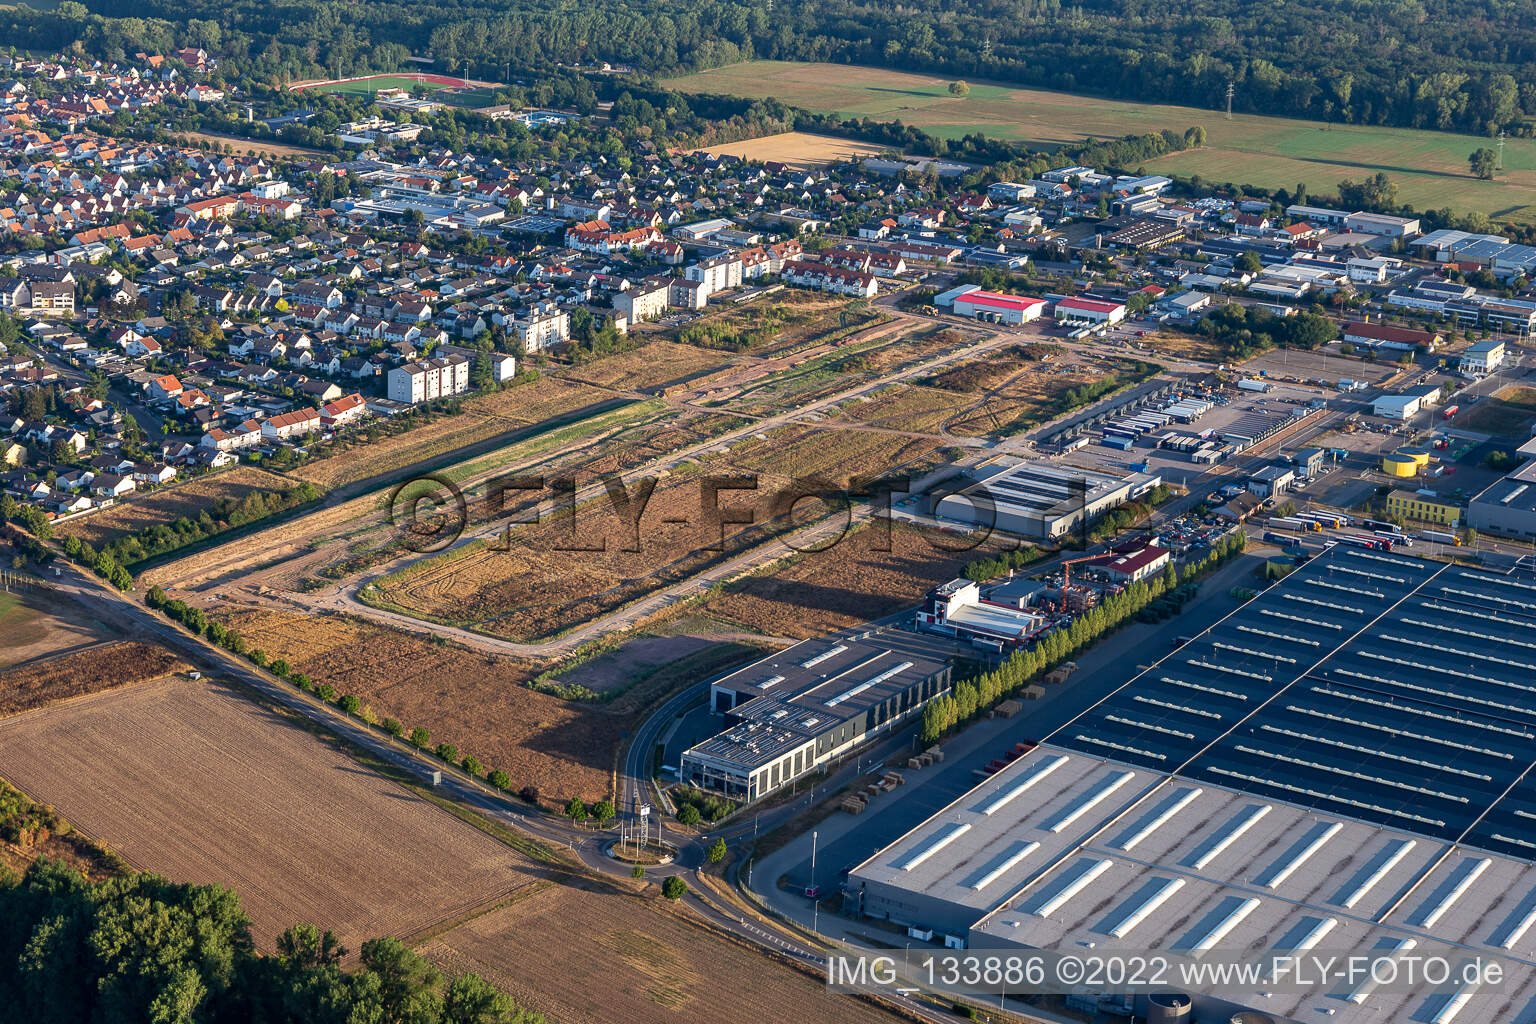 Aerial view of Expansion area of the Interpark in Offenbach an der Queich in the state Rhineland-Palatinate, Germany